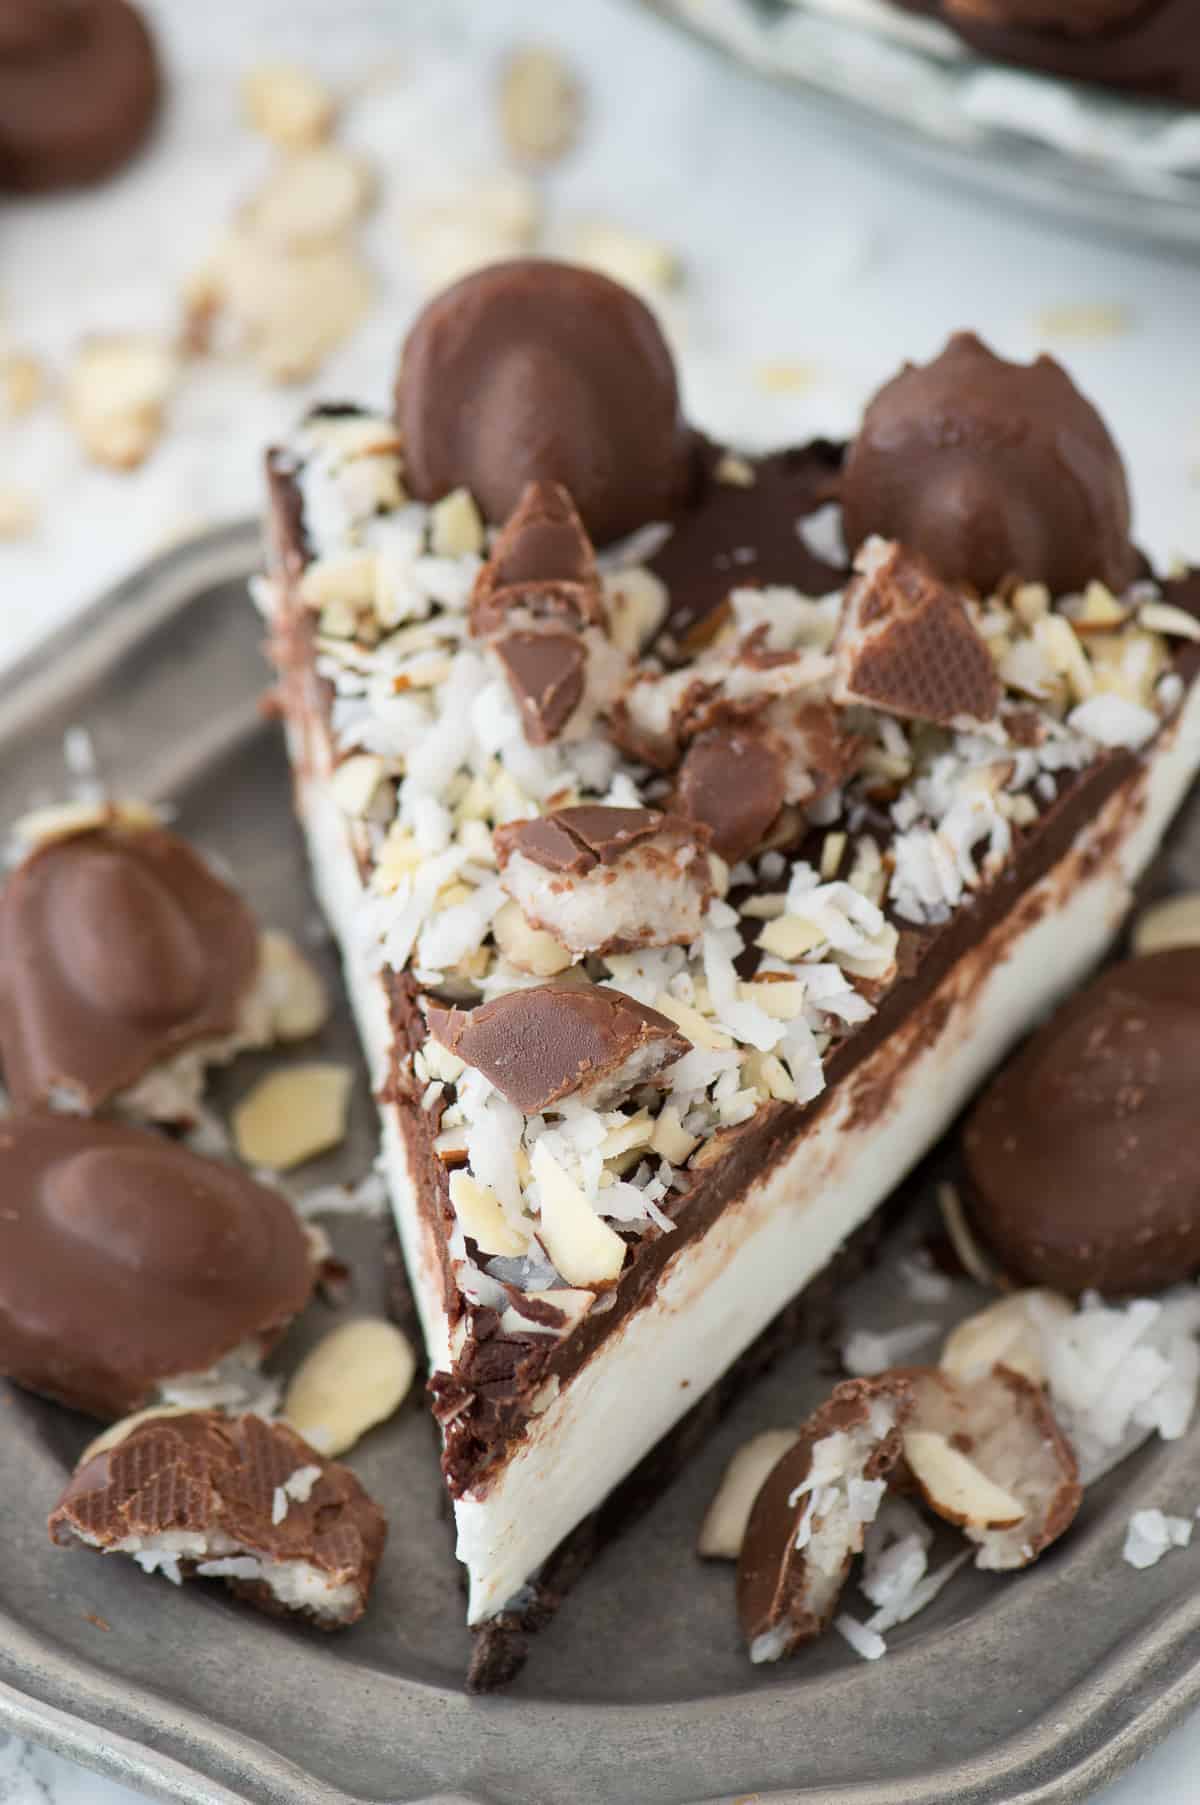 No bake almond joy pie with an oreo crust, creamy coconut filling, chocolate ganache and topped with all the components of an Almond Joy candy bar! 